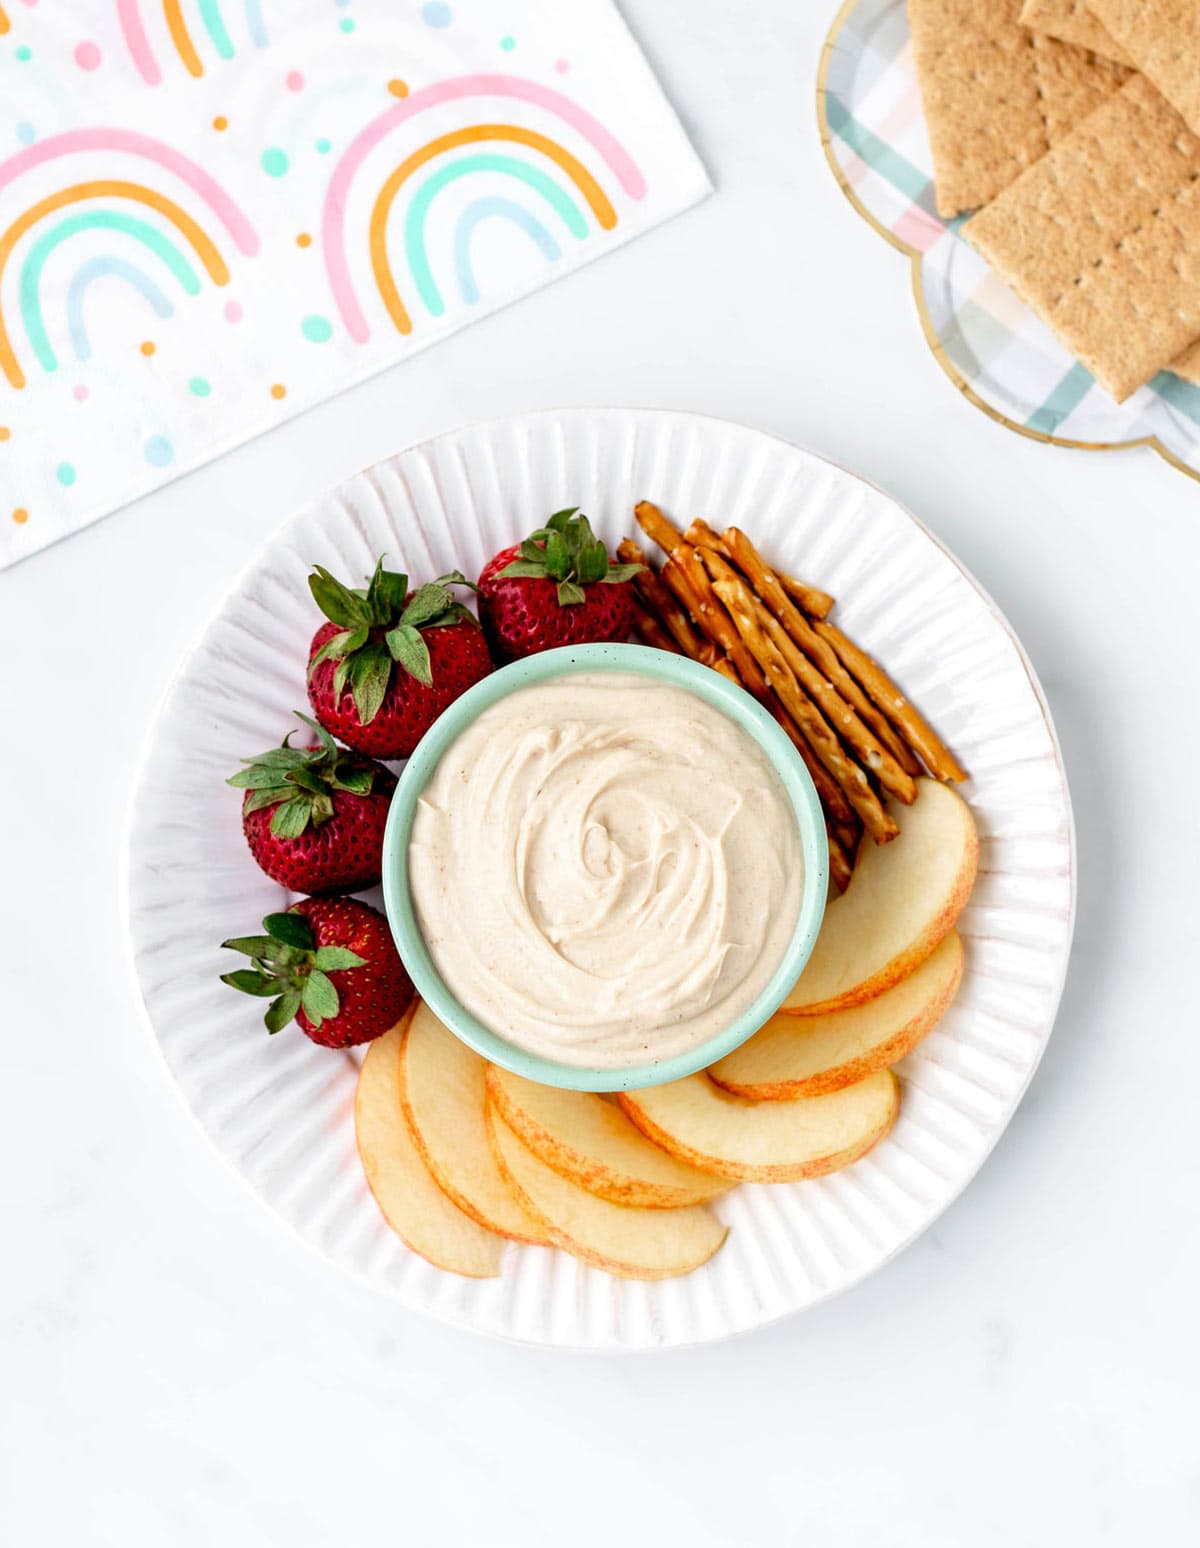 A plate with strawberries, apple slices, pretzels and 4-ingredient peanut butter dip.